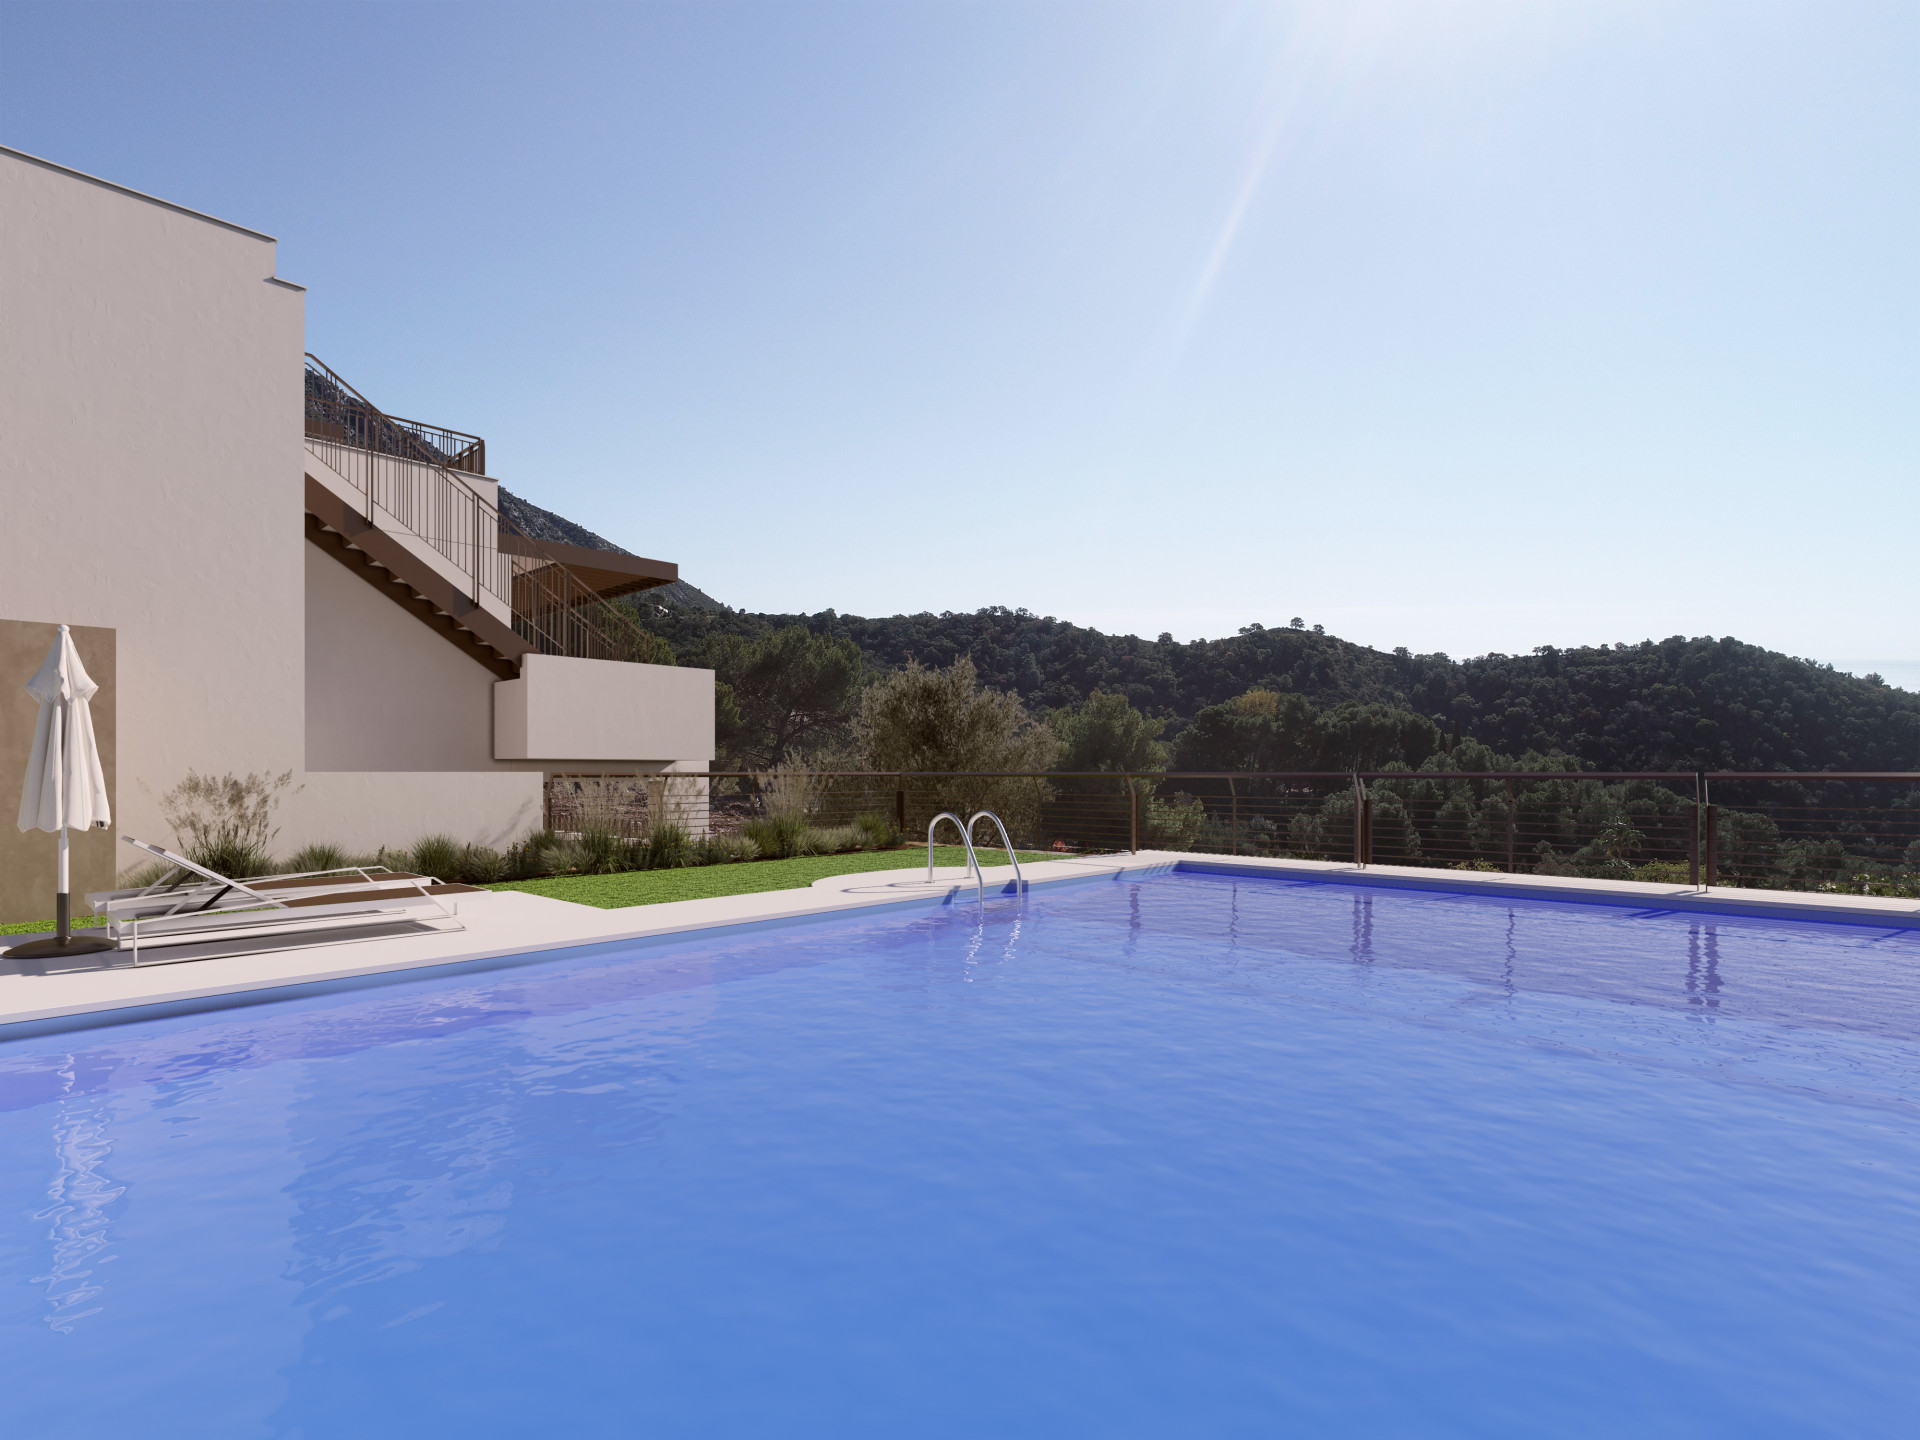 Almazara Hills: Apartments and Penthouses surrounded by nature and close to Marbella | Image 9